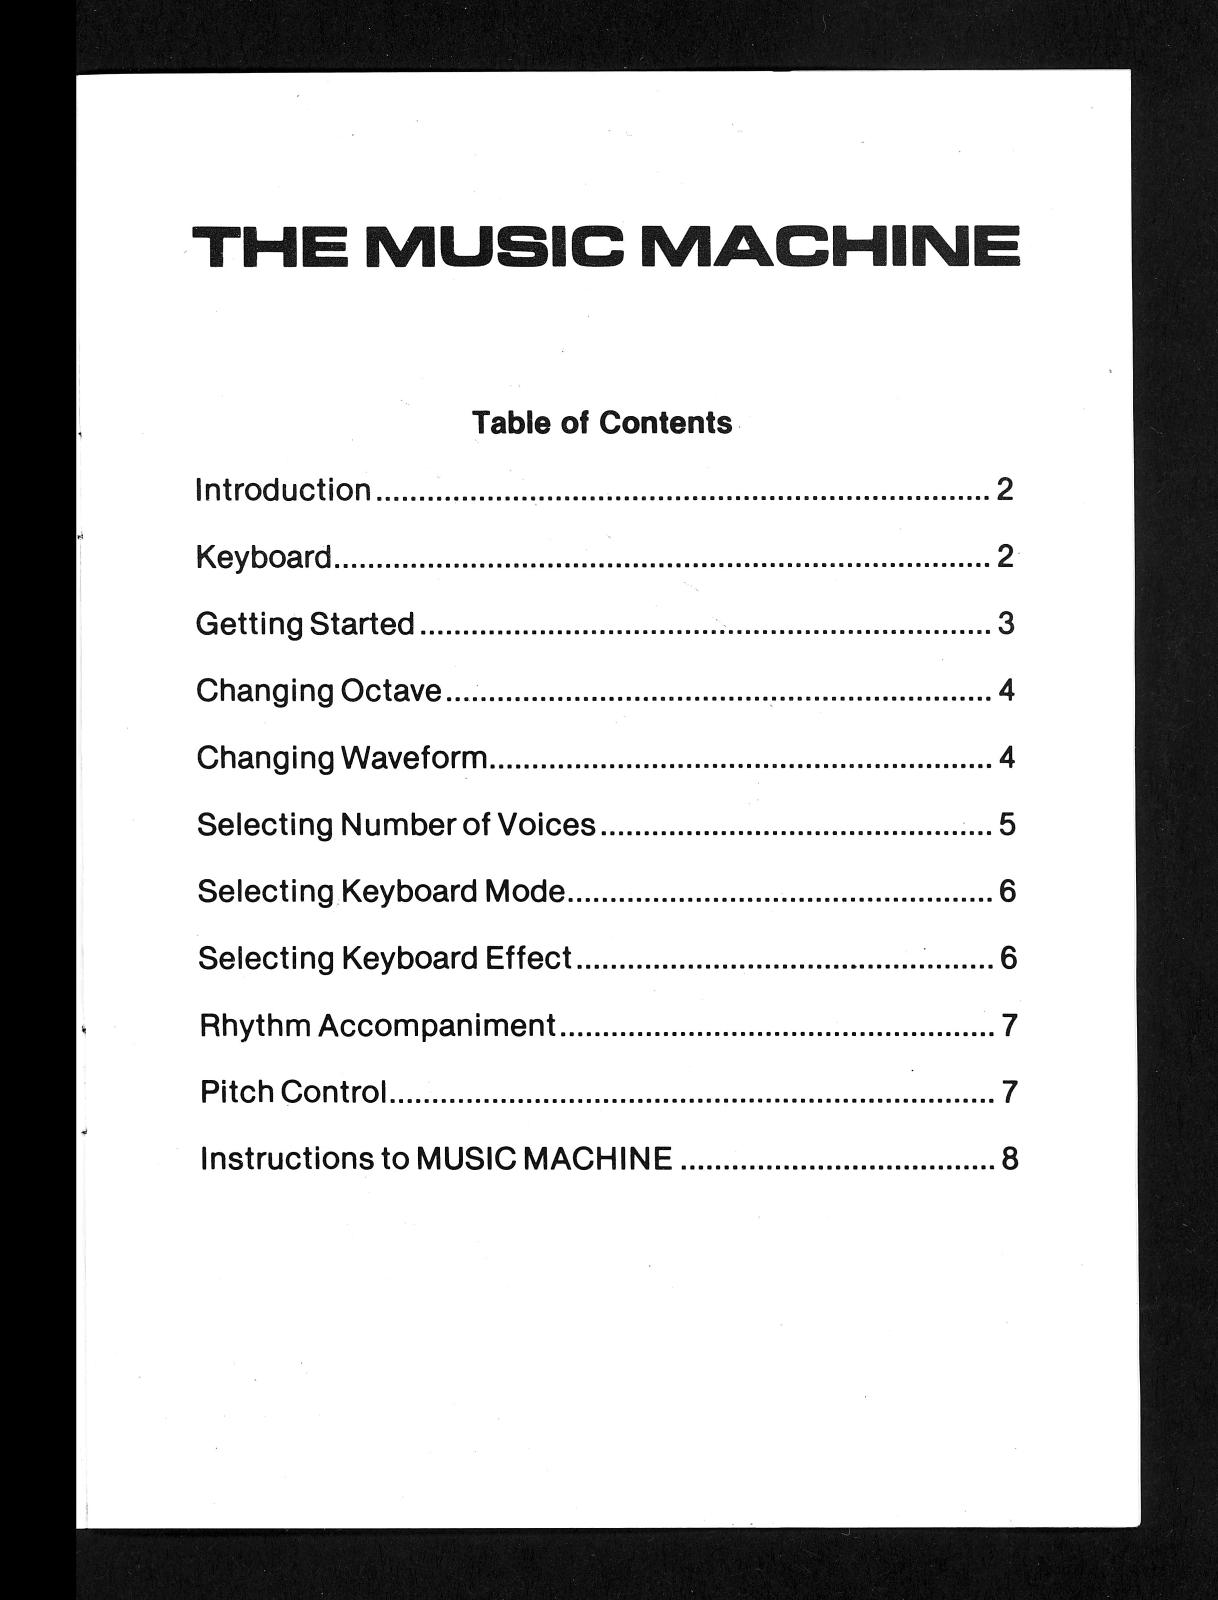 Table of contents page for Music Machine instruction book. Black printing on white page with "The Music Machine" in capitals at the top of the page. Listed below this are the contents of the 8 pages of the book.